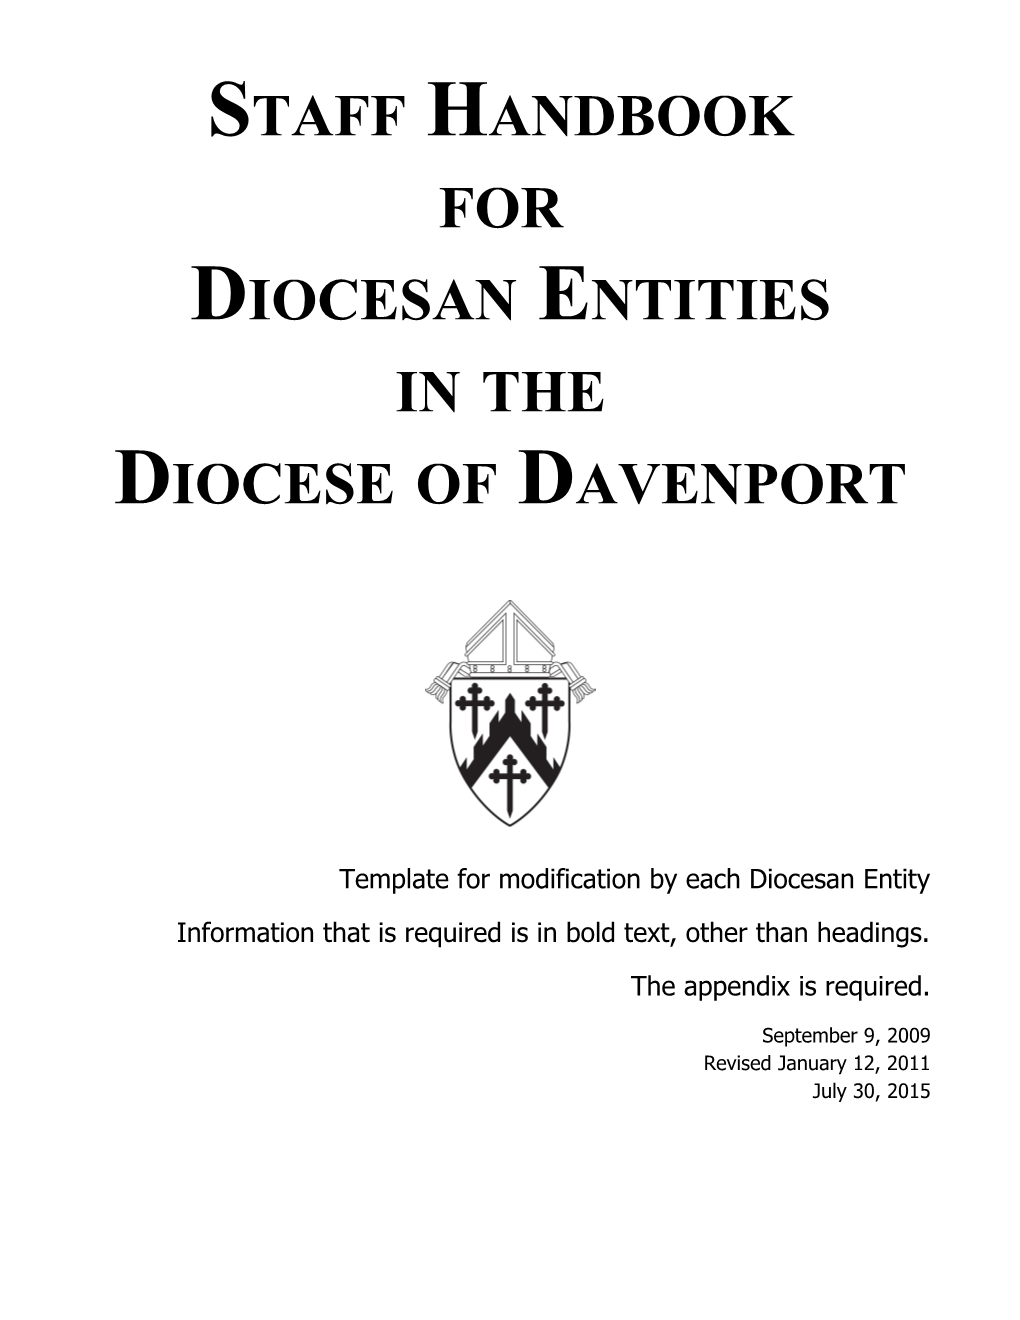 Diocese of Davenport - Staff Handbook for Diocesan Entities